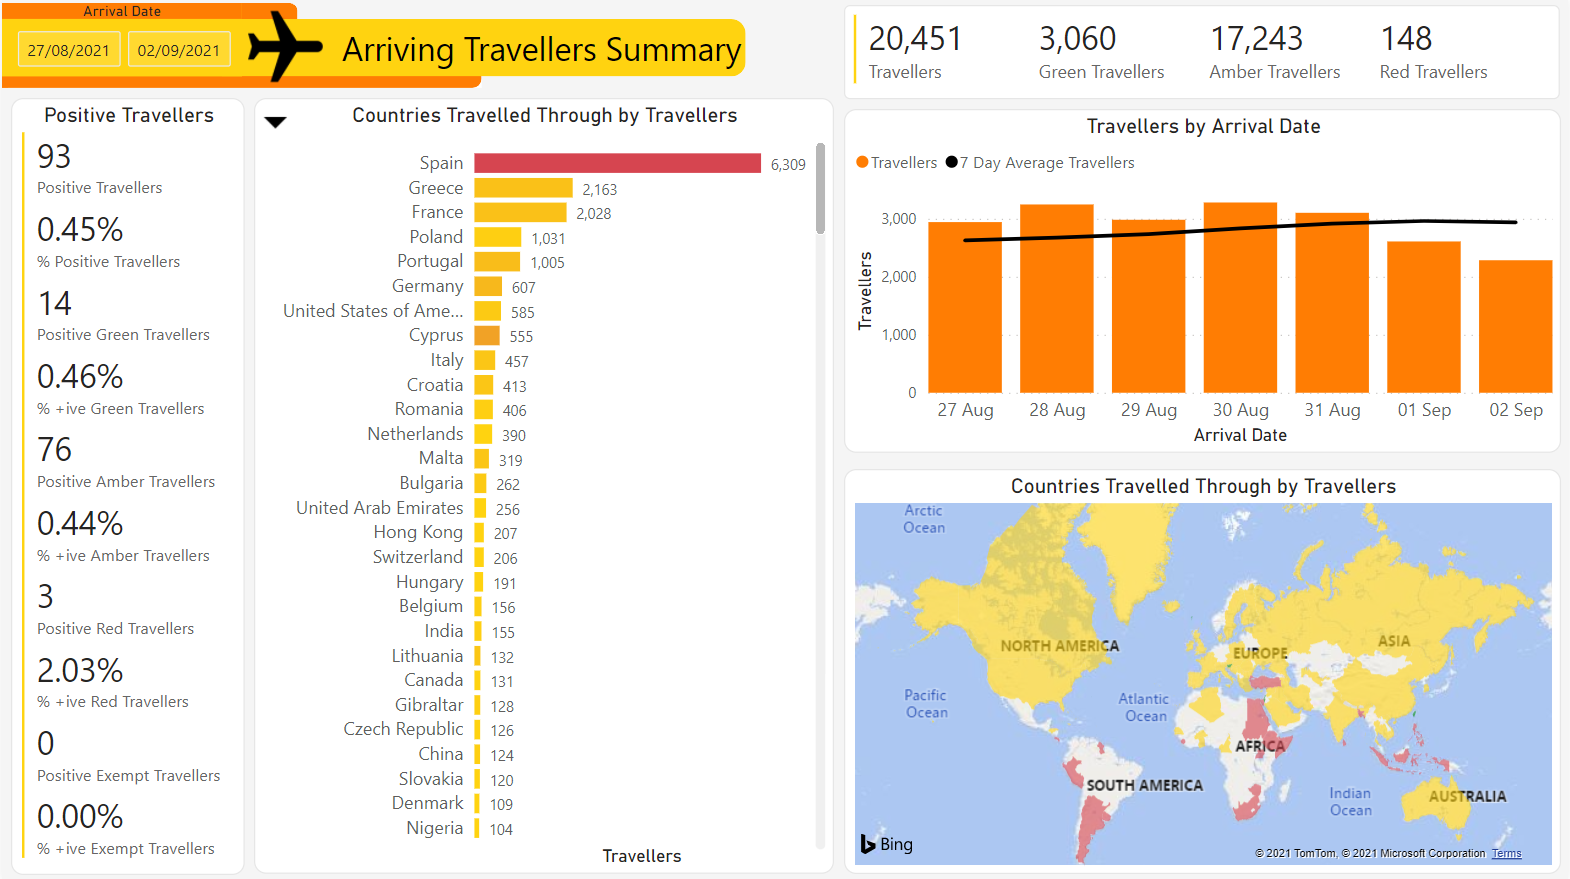 Bar charts and map showing travel data and number of positive travellers